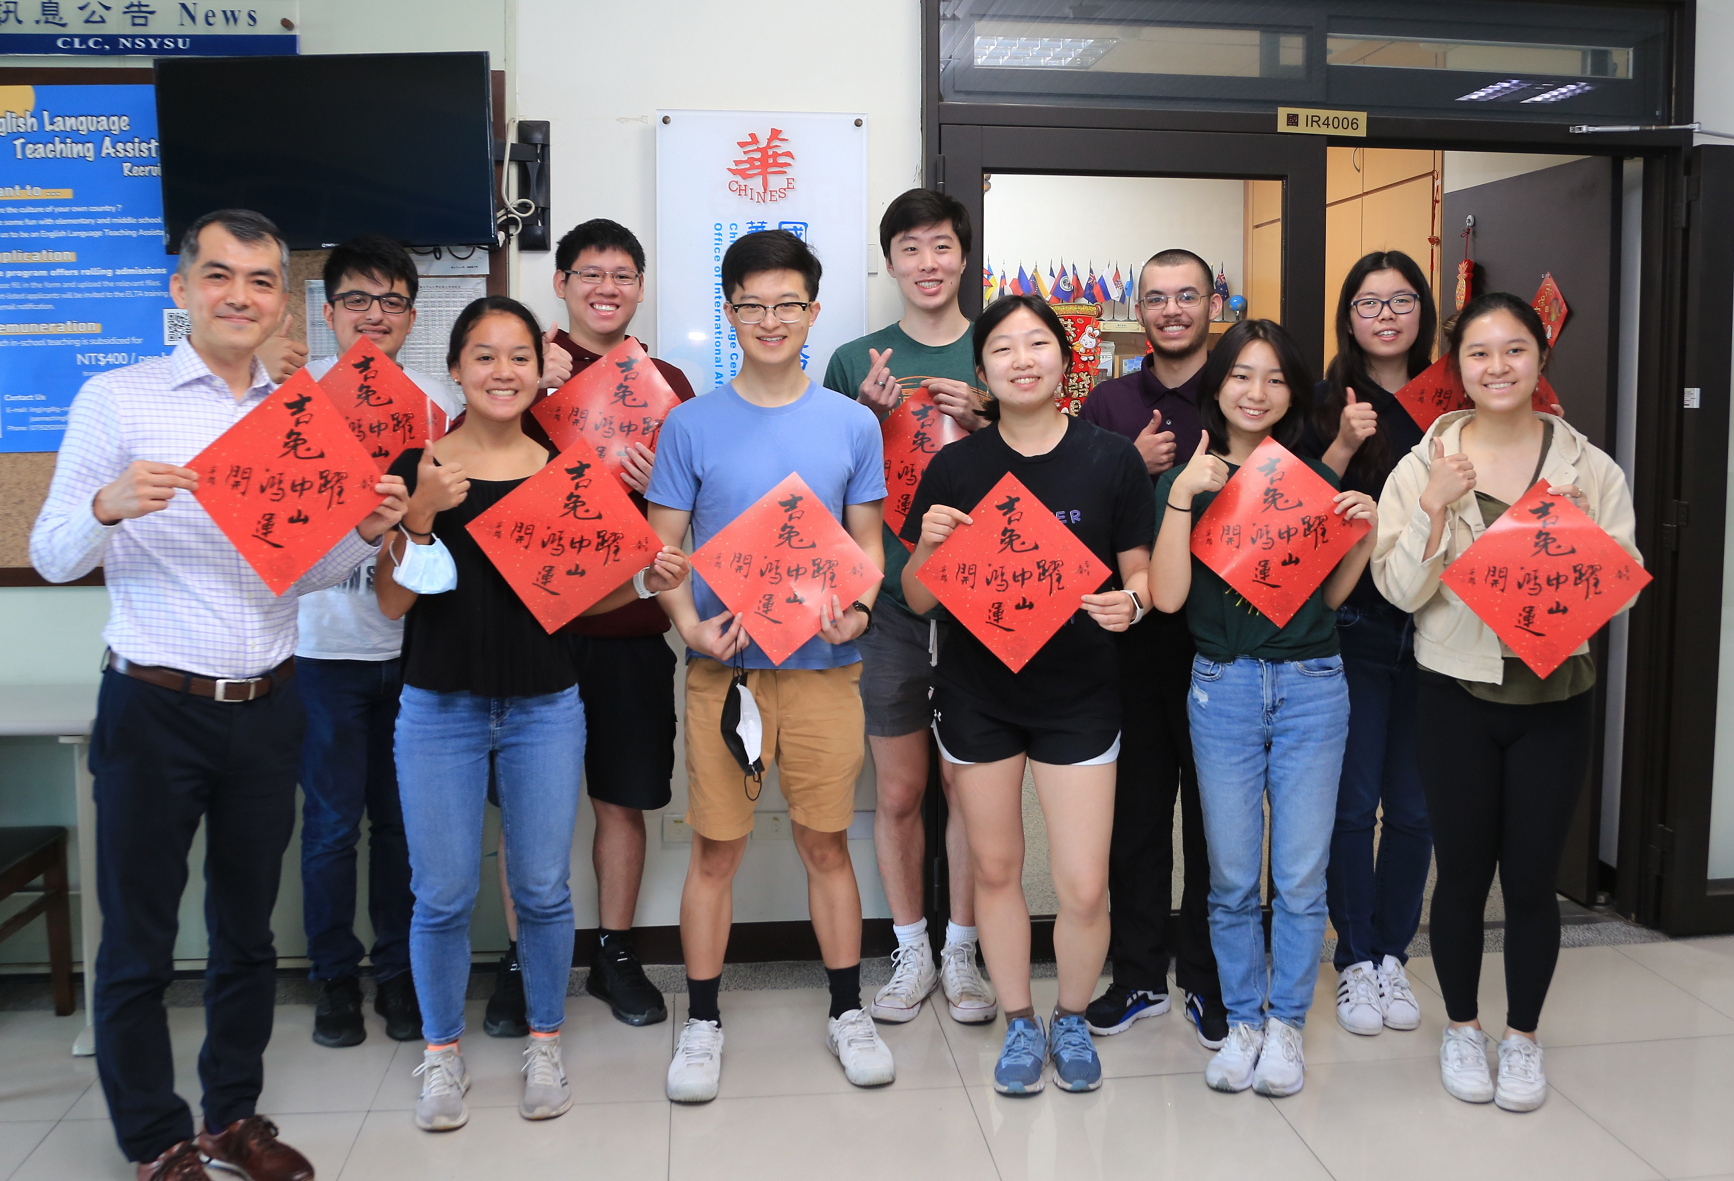 NSYSU President Ying-Yao Cheng presented MIT students with handwritten calligraphy Spring Festival couplets